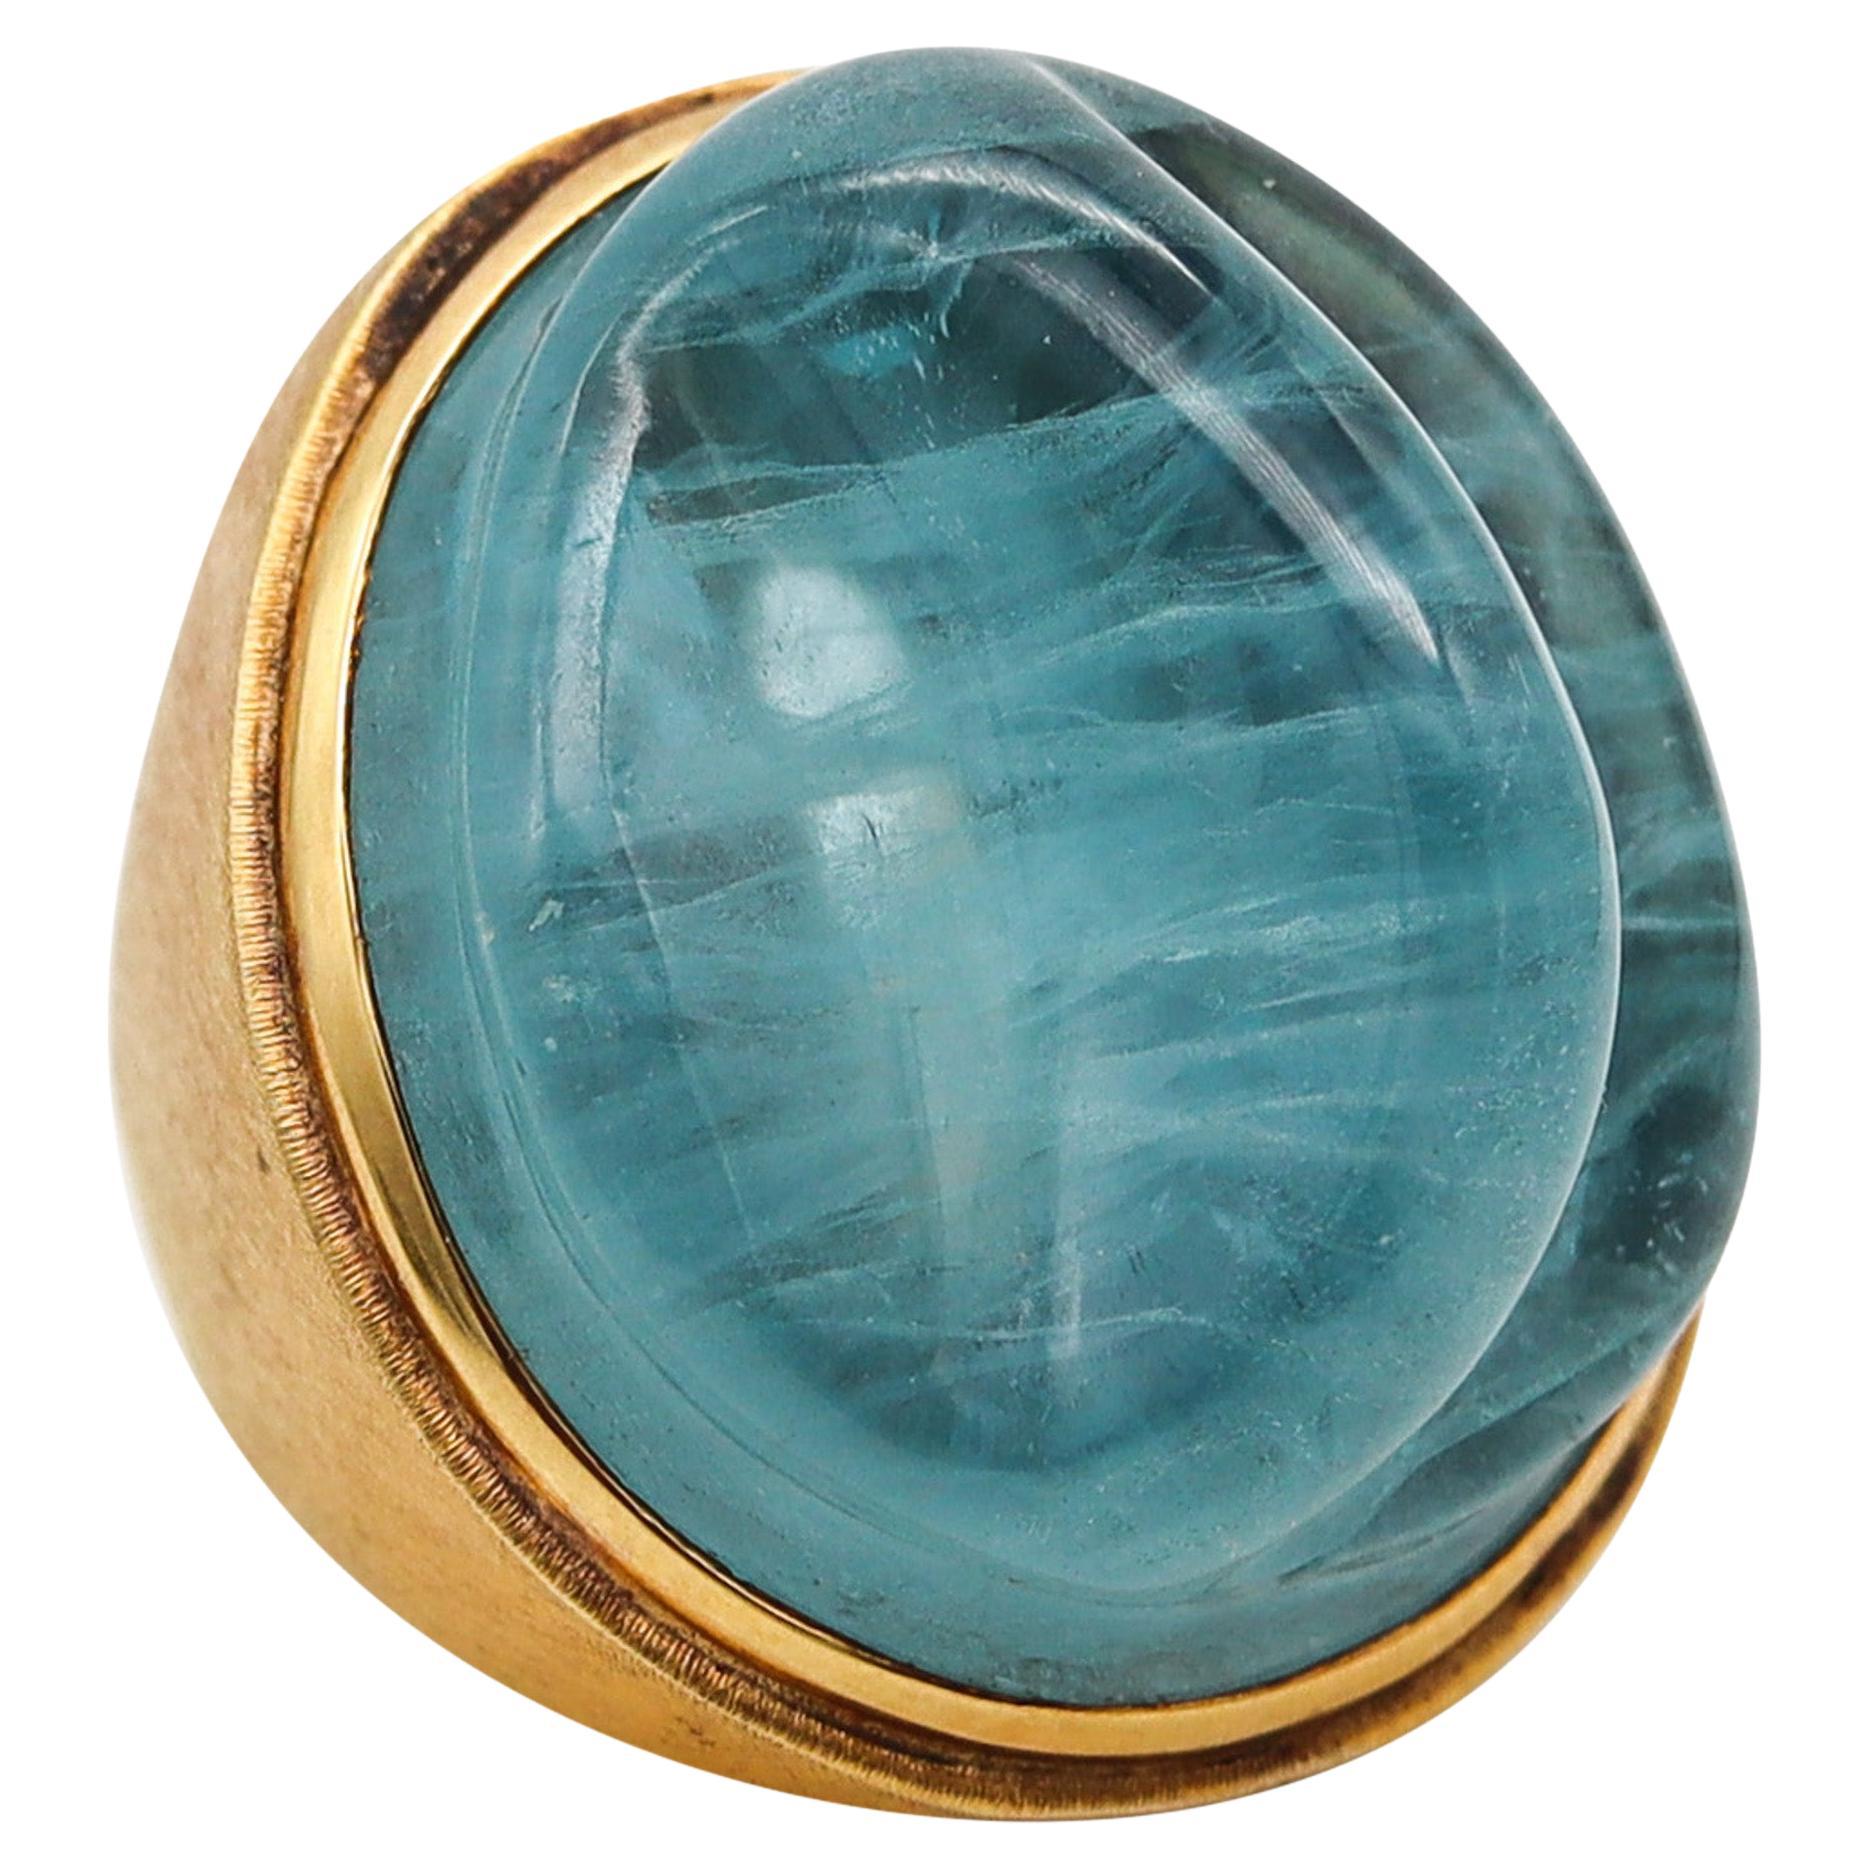 Burle Marx Bruno Guidi 1970 Cocktail Ring 18Kt Yellow Gold and 35Cts Aquamarine